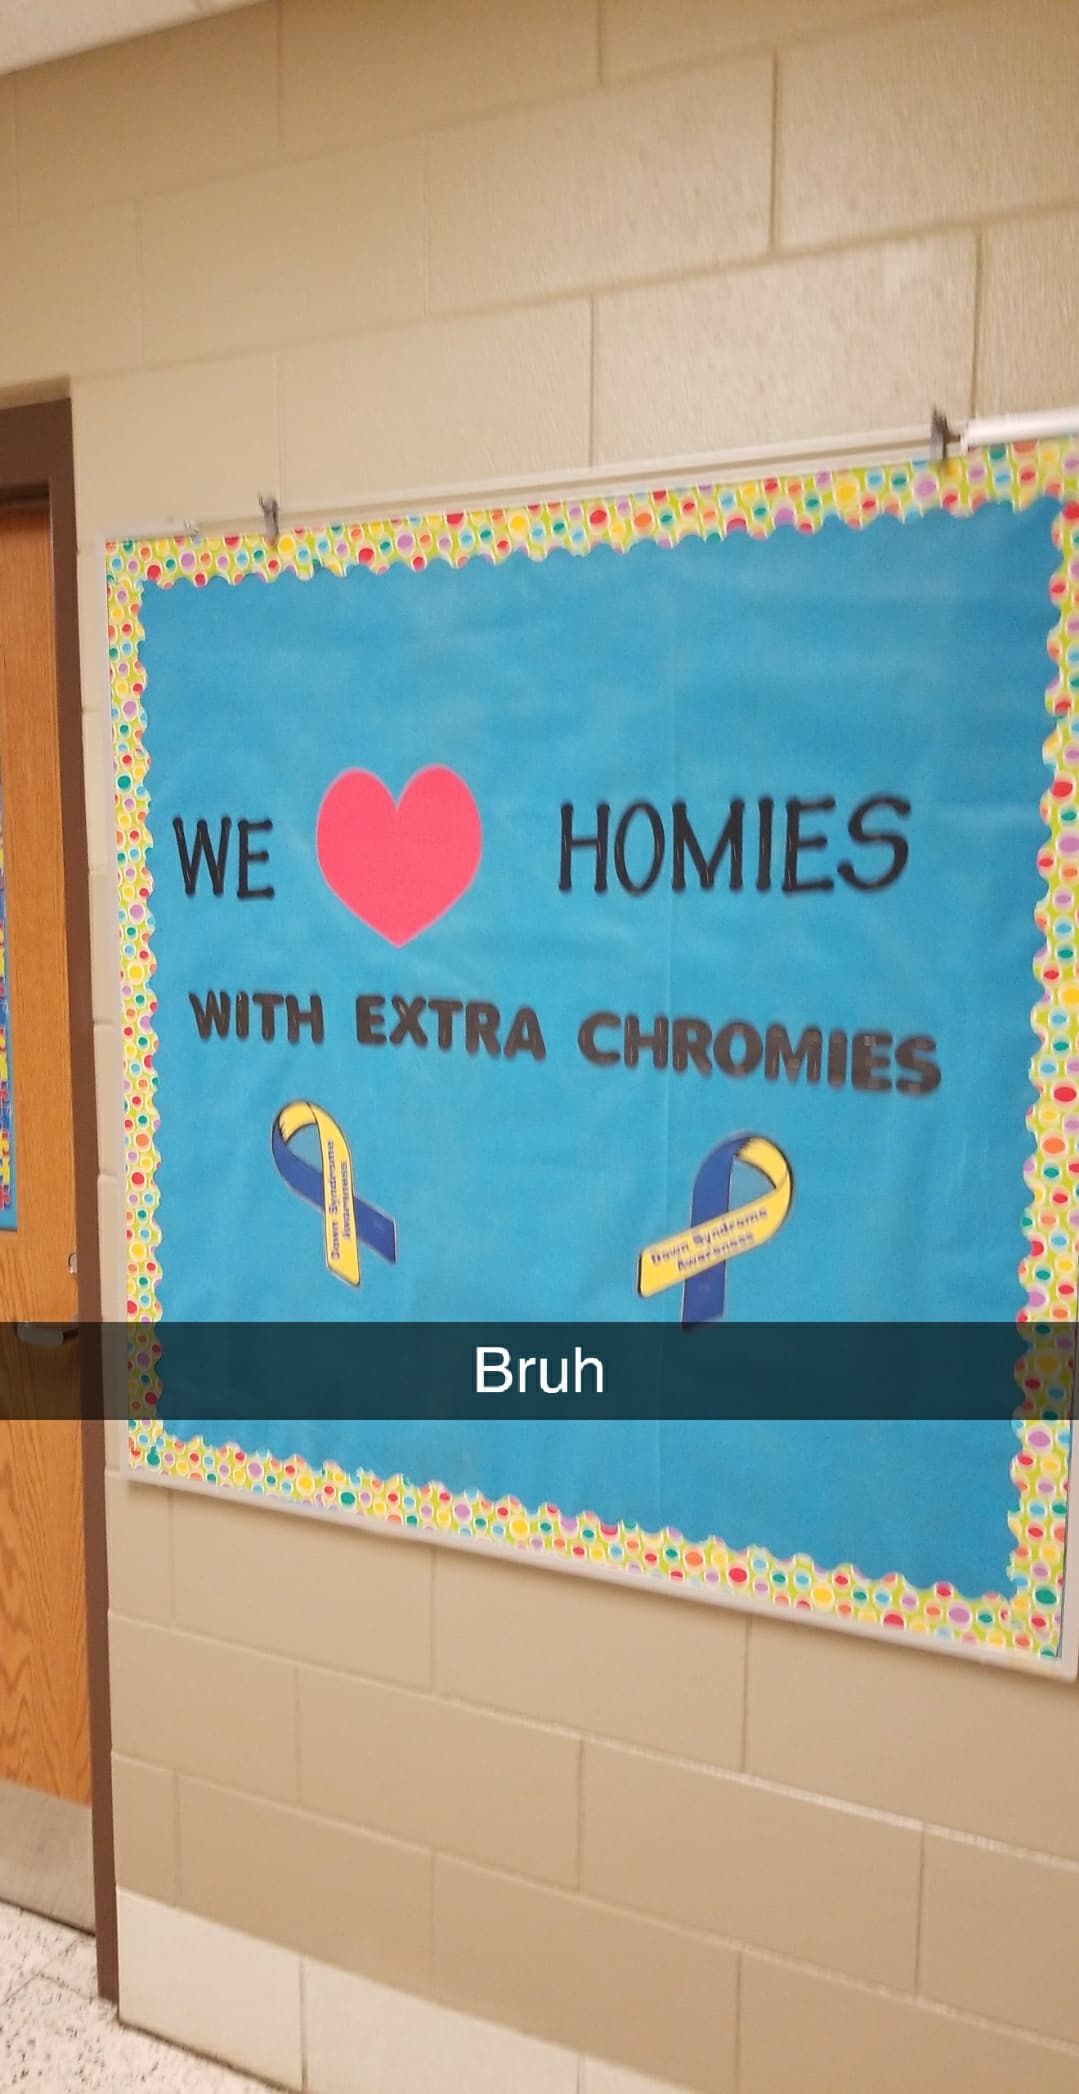 Special needs teachers put this up today.